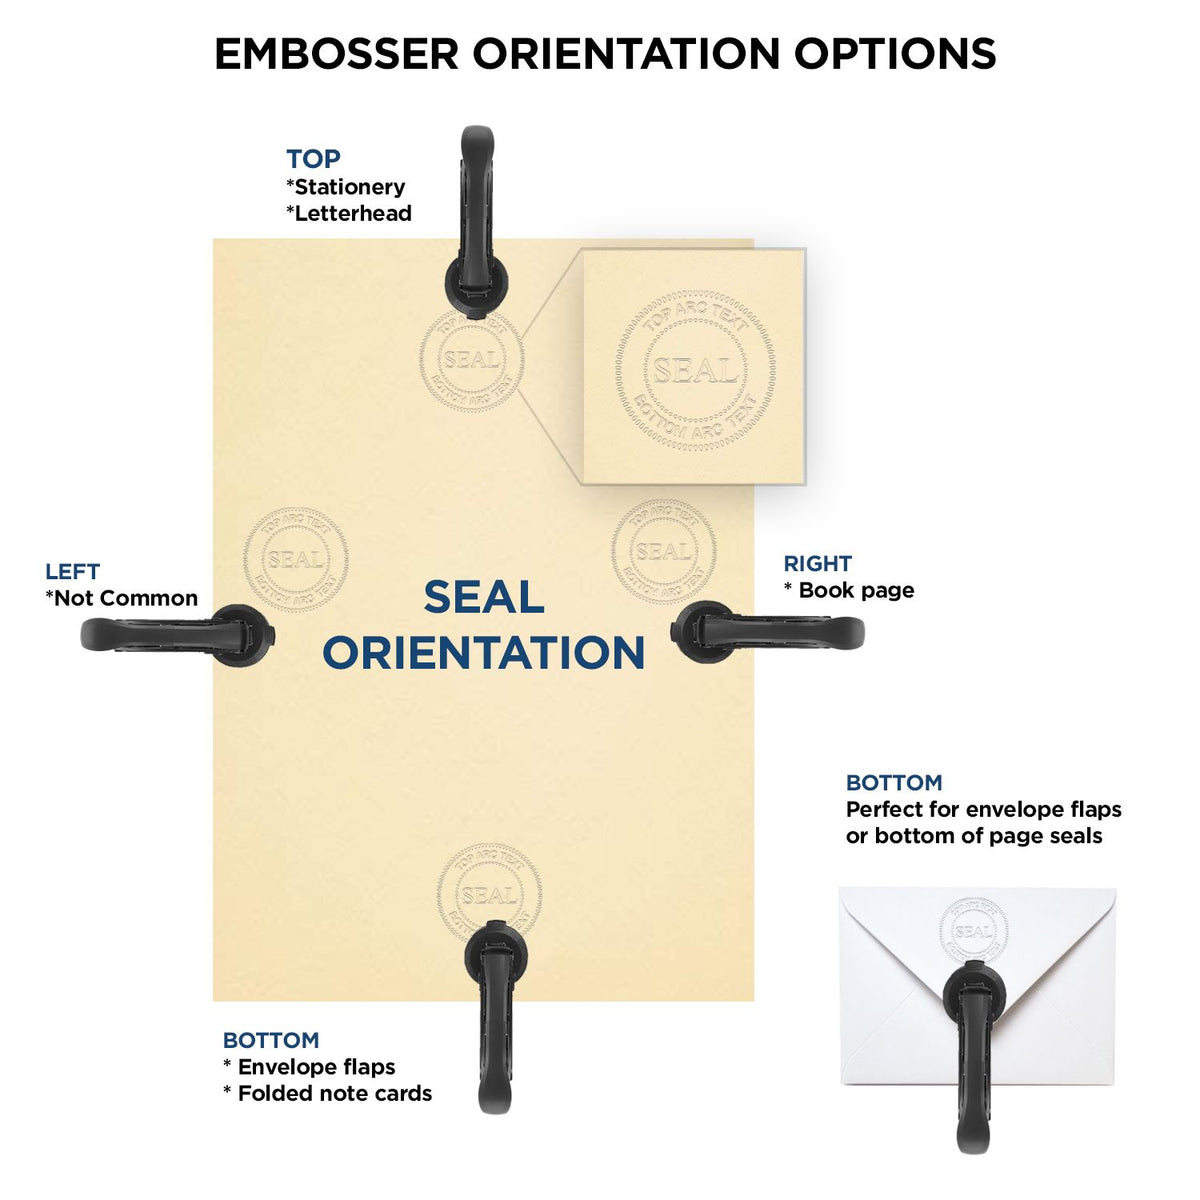 An infographic for the Handheld South Carolina Professional Engineer Embosser showing embosser orientation, this is showing examples of a top, bottom, right and left insert.